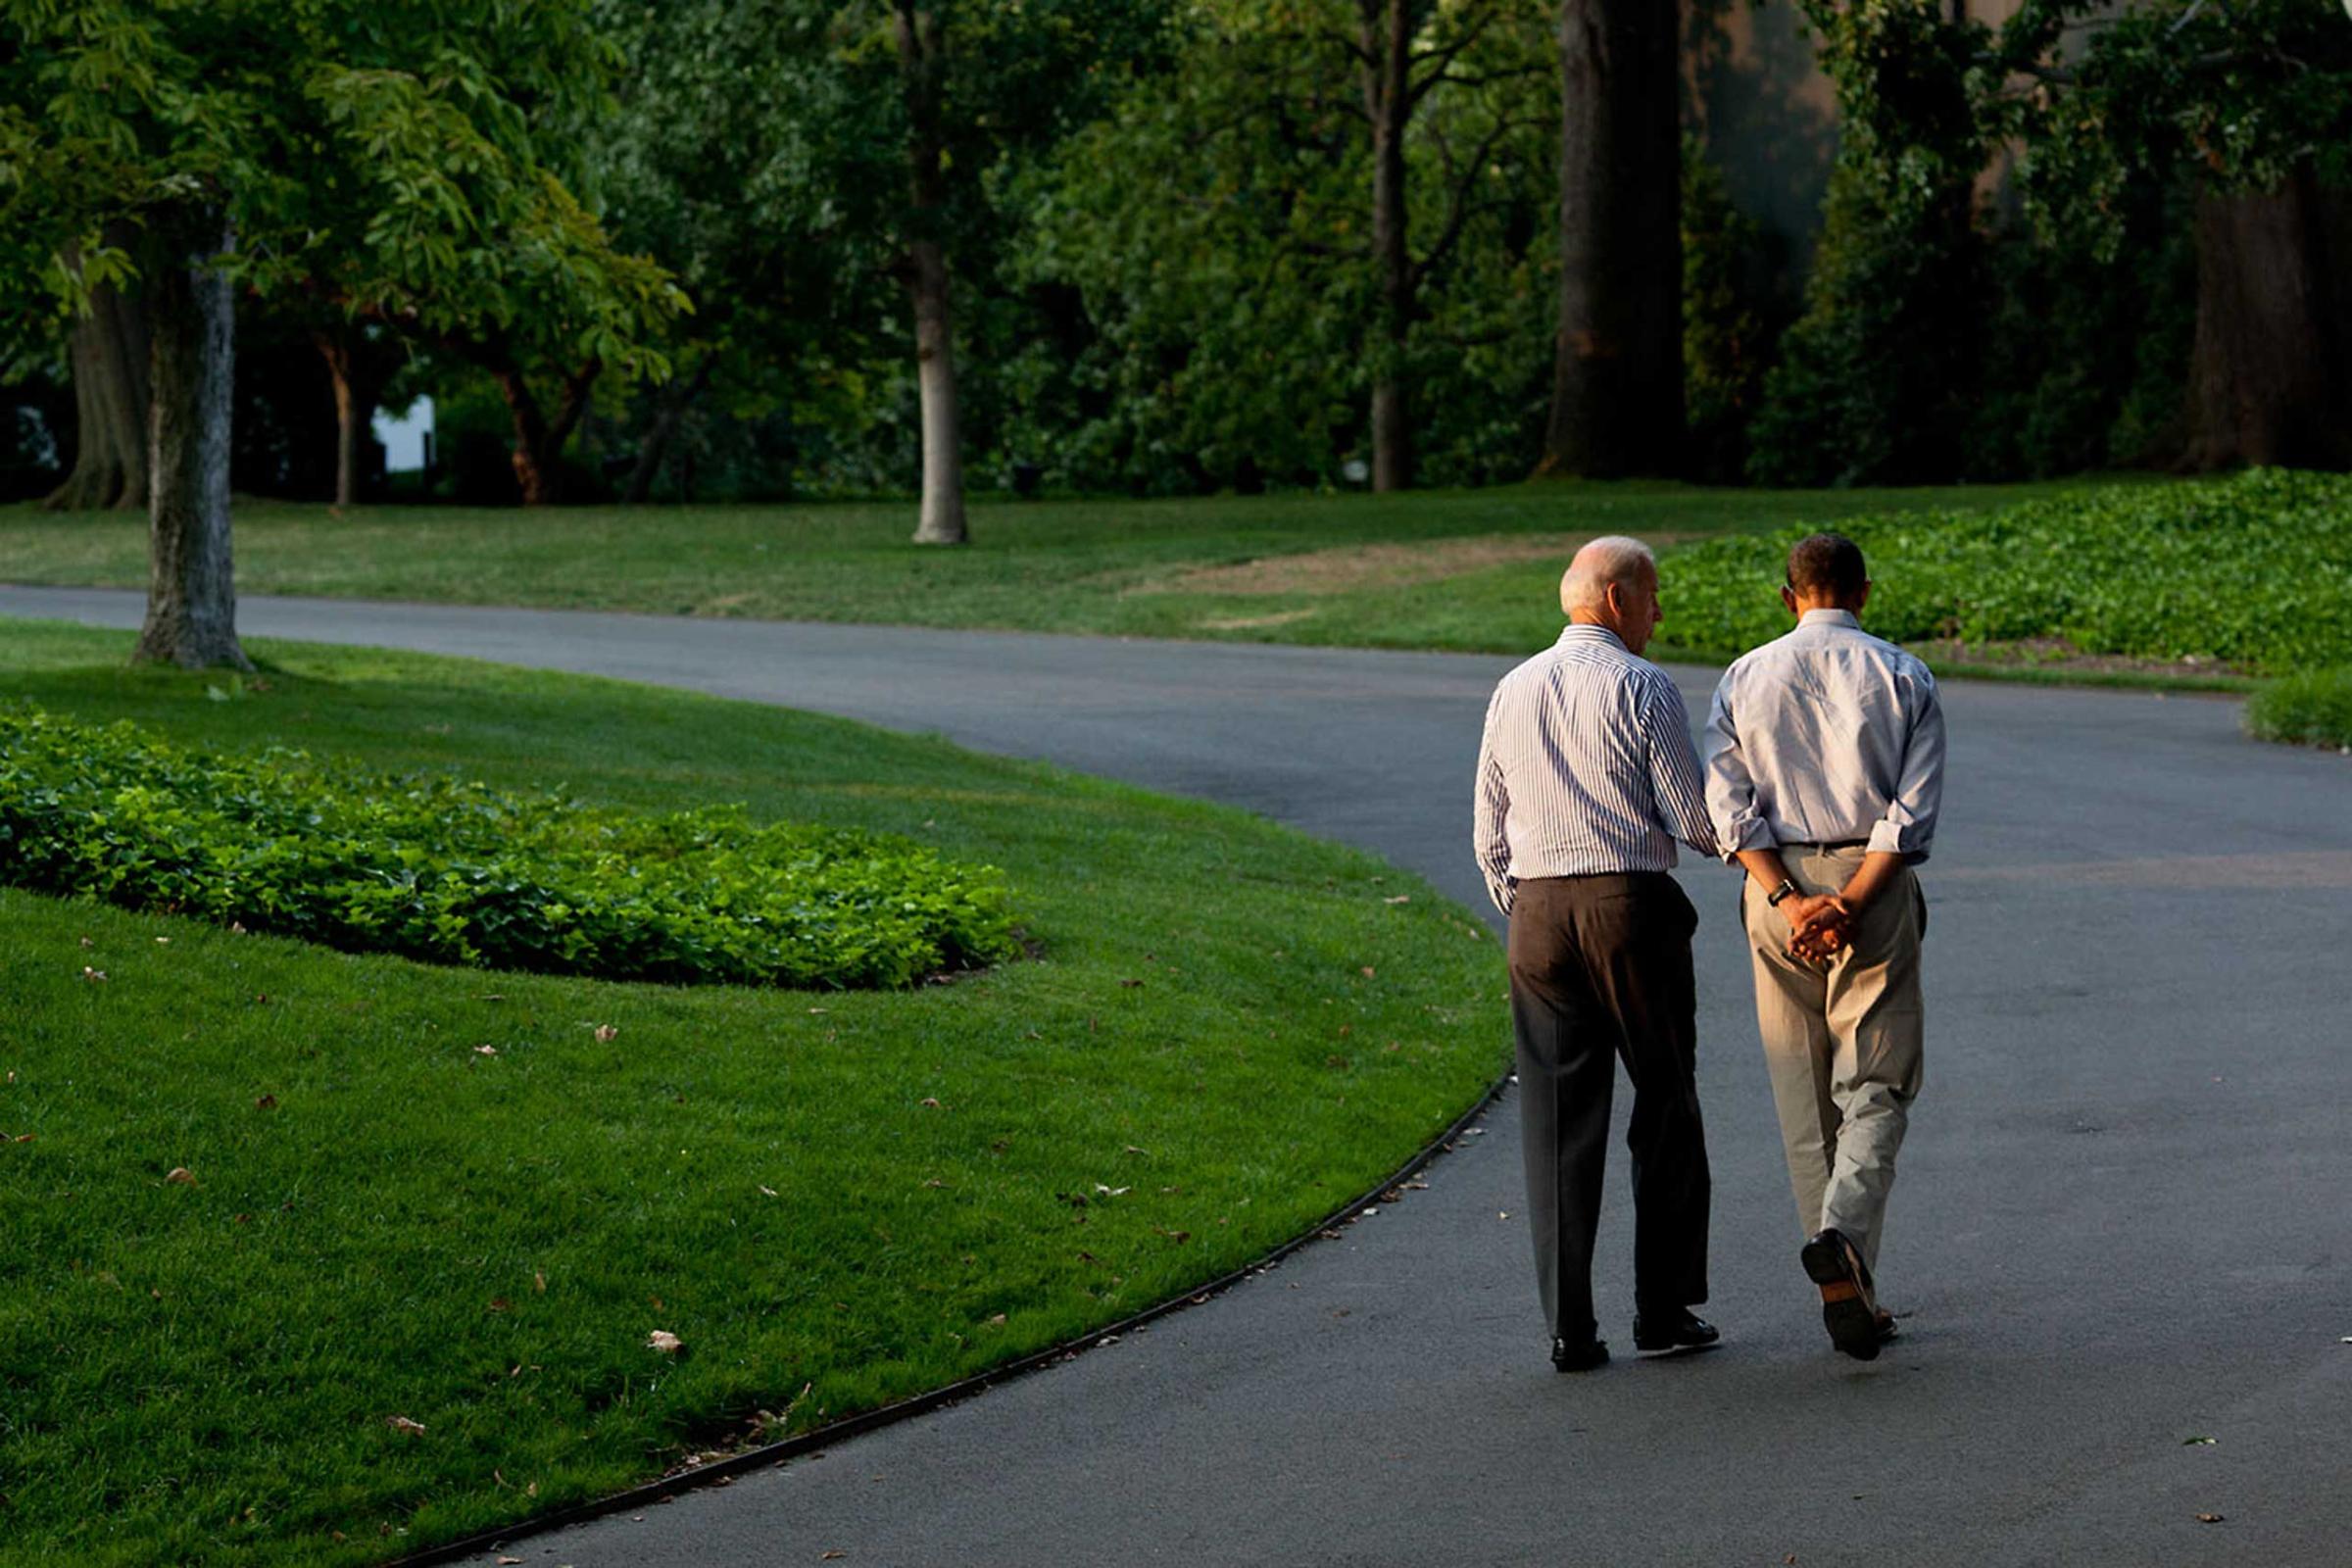 "During a break in the debt limit and deficit negotiations with Congressional leaders, the President walks around the South Lawn drive of the White House with the Vice President on Sunday, July 24, 2011. As they walked, I was trying to catch them where there was one pocket of sunlight seeping through the trees."